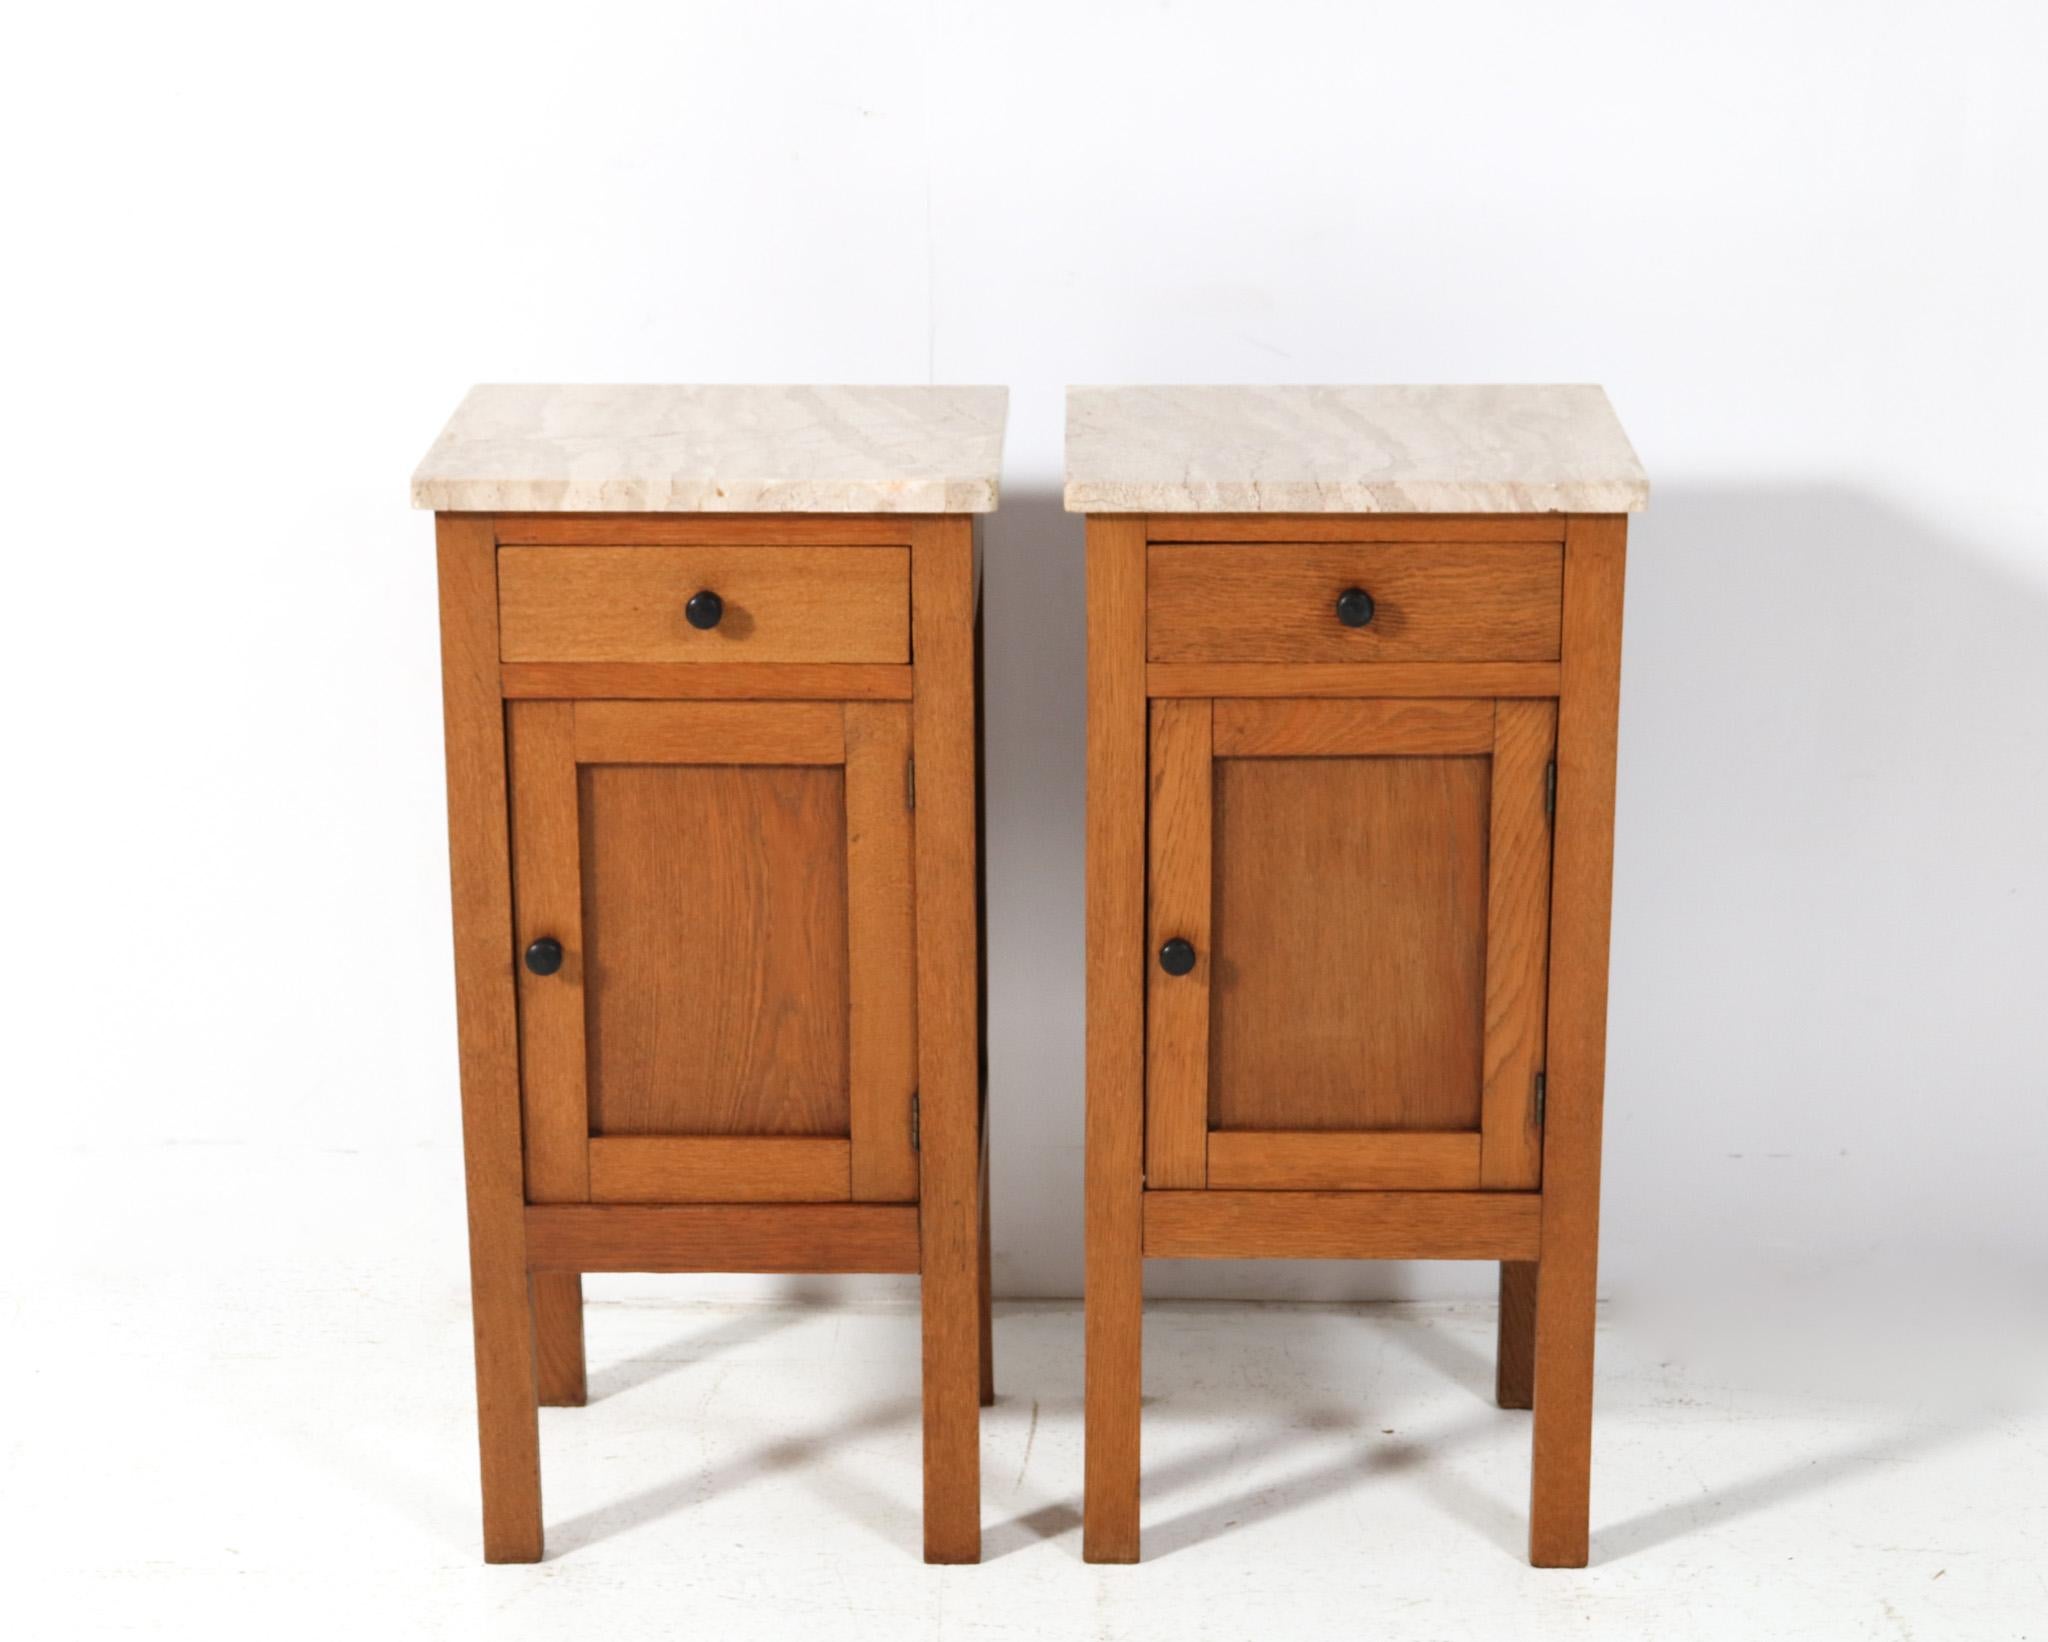 Stunning and elegant pair of Arts & Crafts Art Nouveau nightstands or bedside tables.
Striking Dutch design from the 1900s.
Solid oak base with original solid ebony knobs on doors and drawers.
Two original multi-colored marble tops.
This wonderful